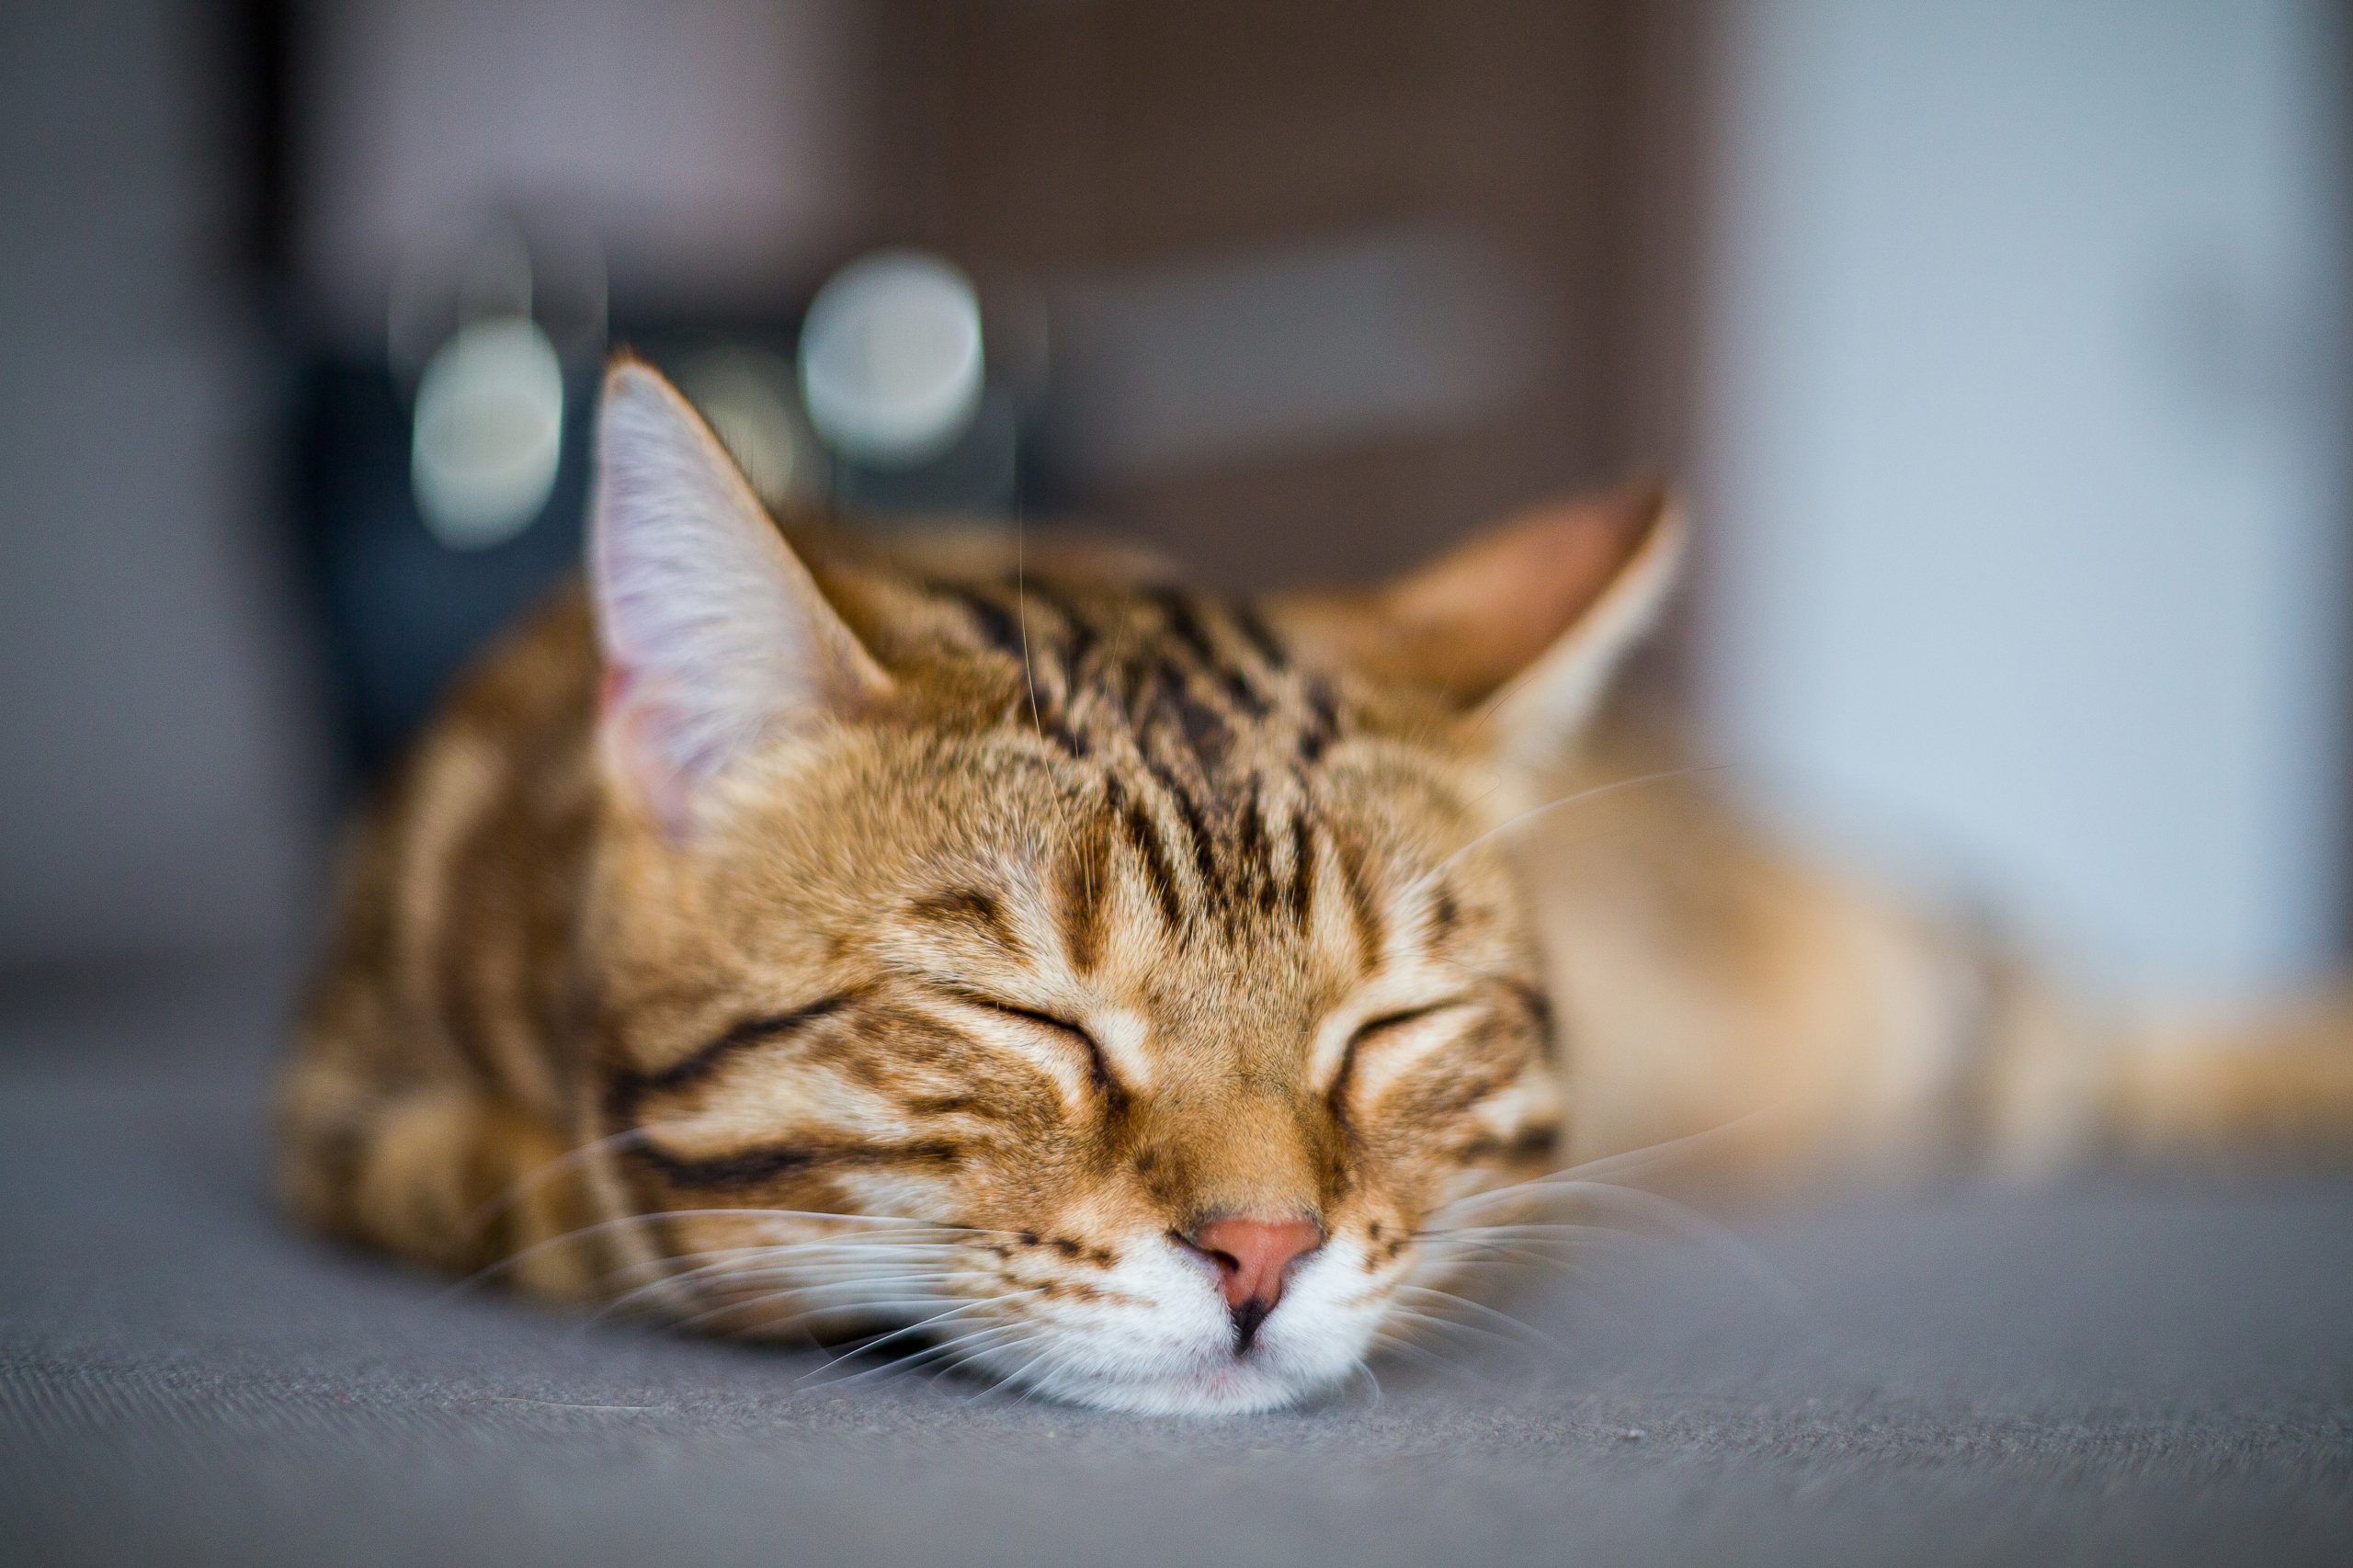 Weight loss, lethargy and weakness, pale gums and swollen lymph nodes are symptoms of Feline Leukemia Virus.